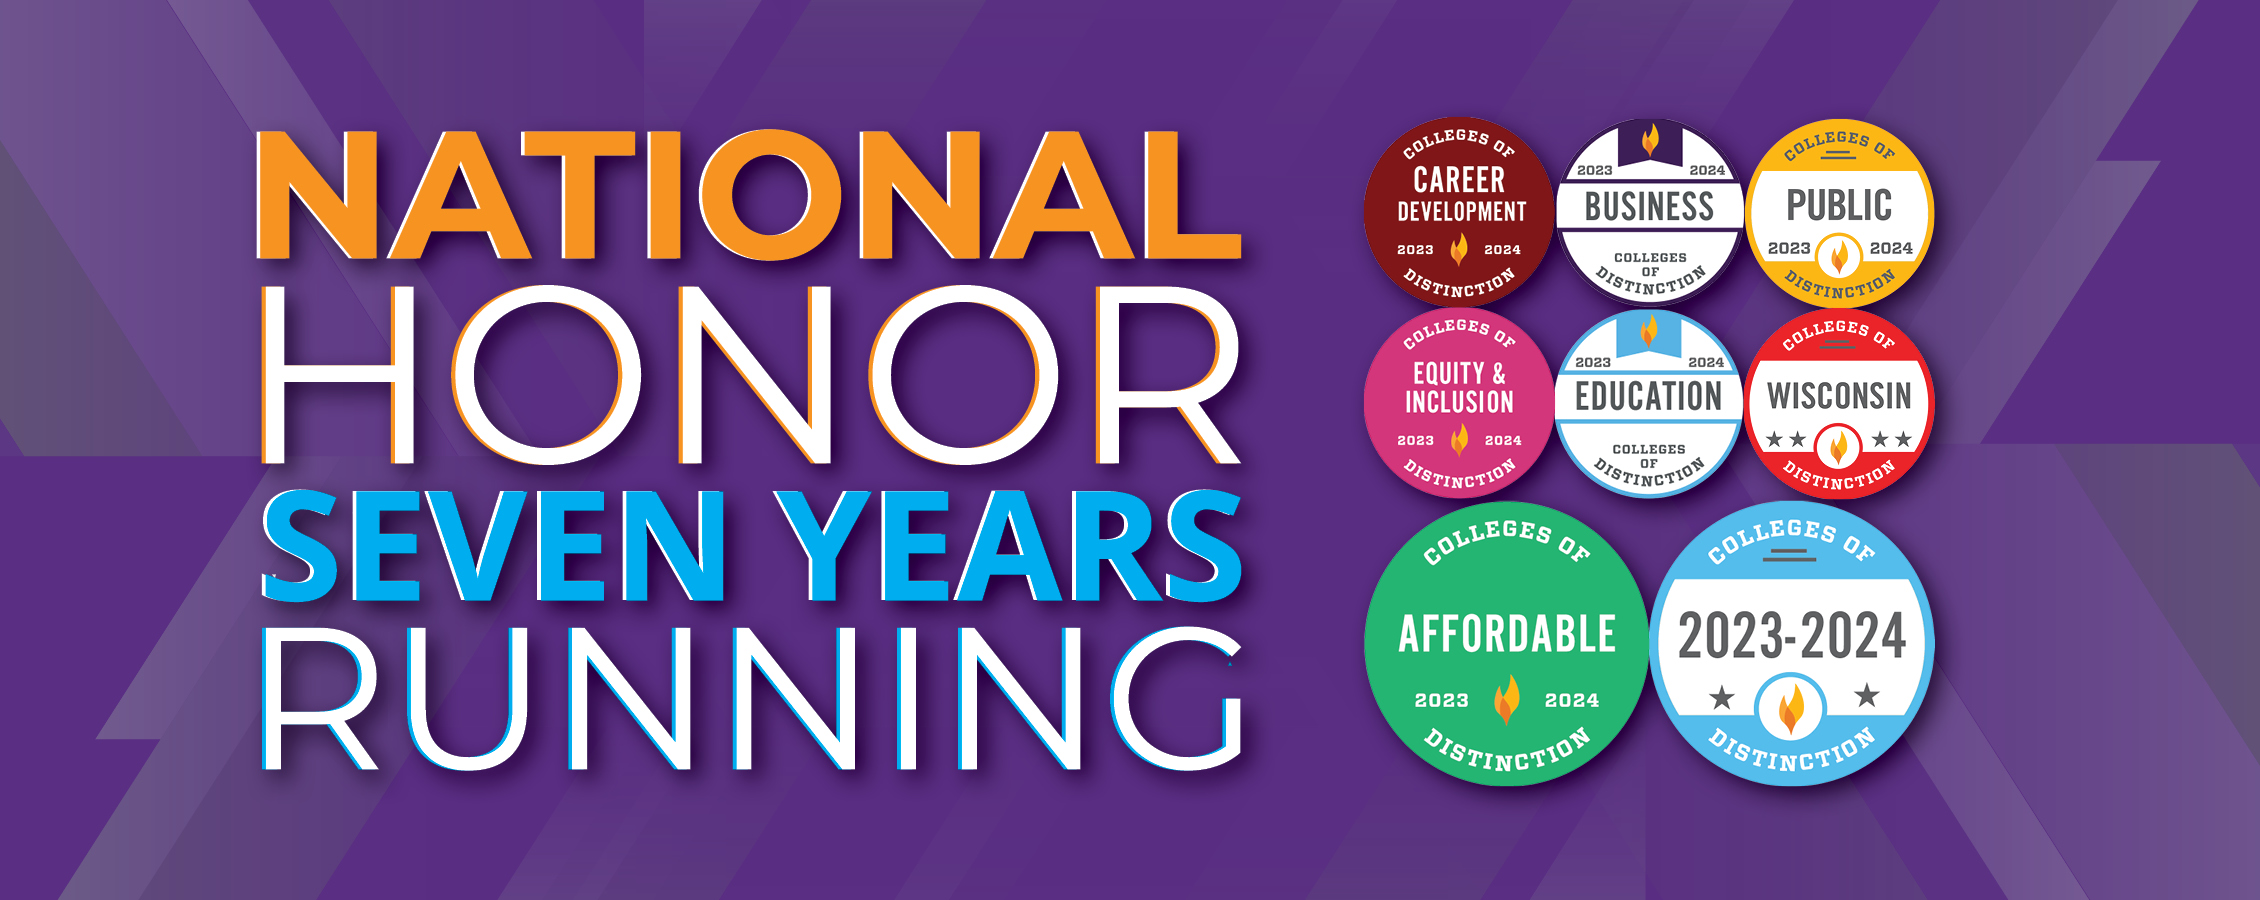 National Honor seven years running graphic with purple background.